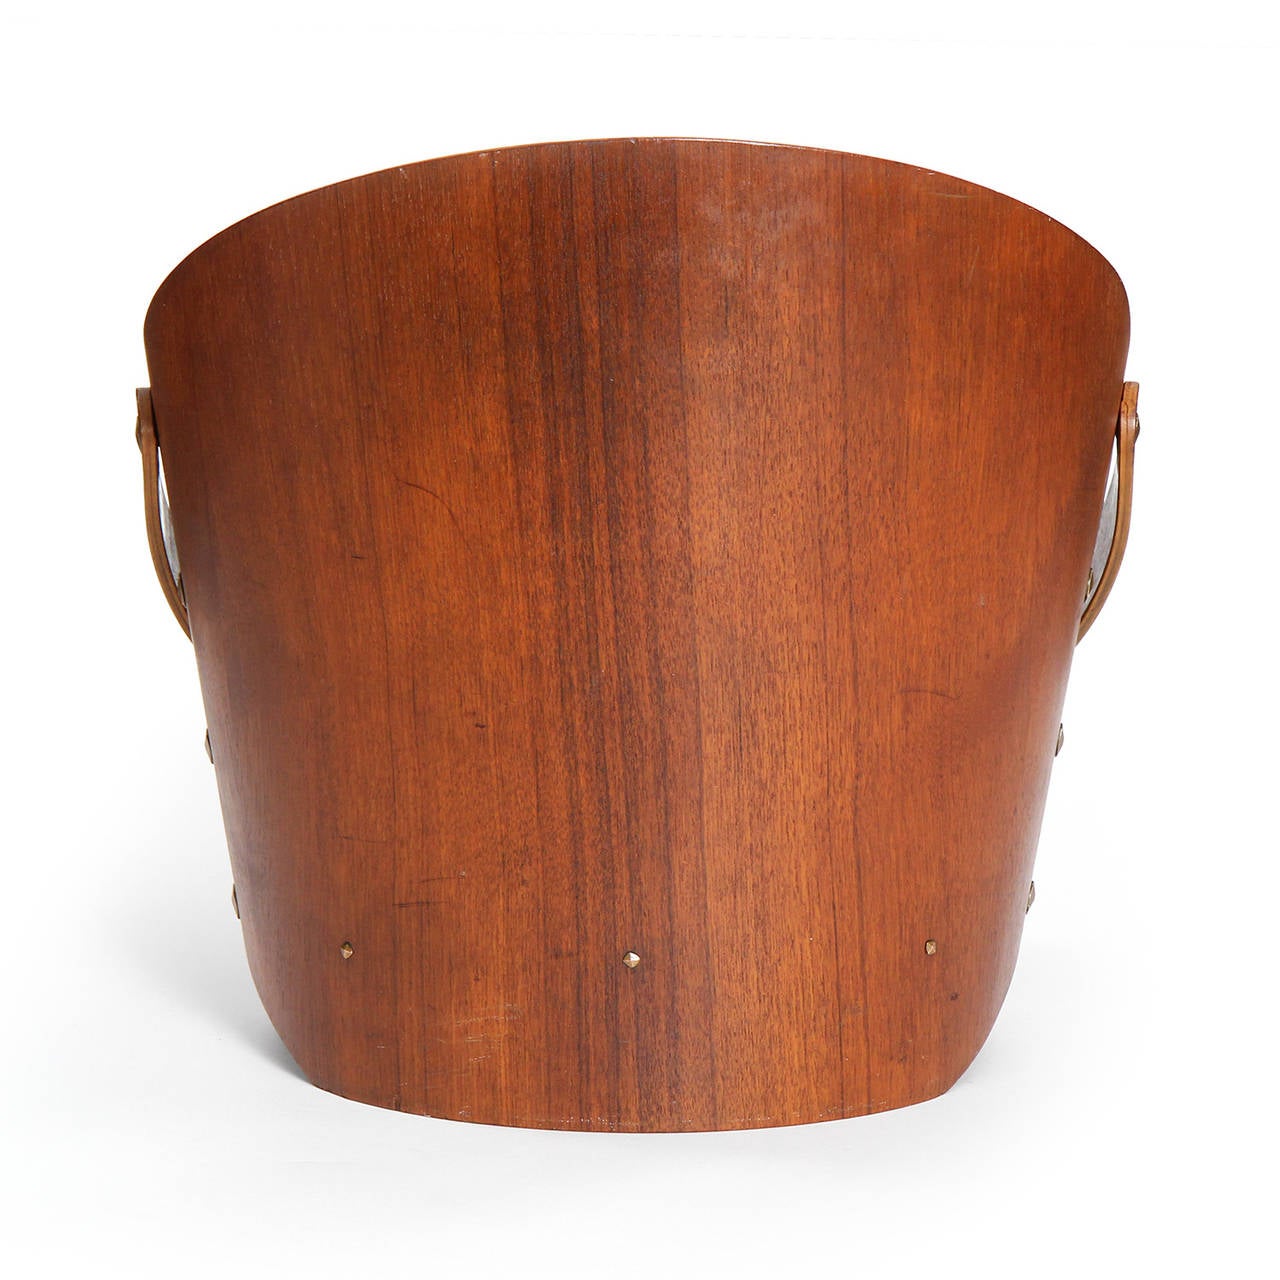 Mid-20th Century Teak Peridiocals Basket For Sale